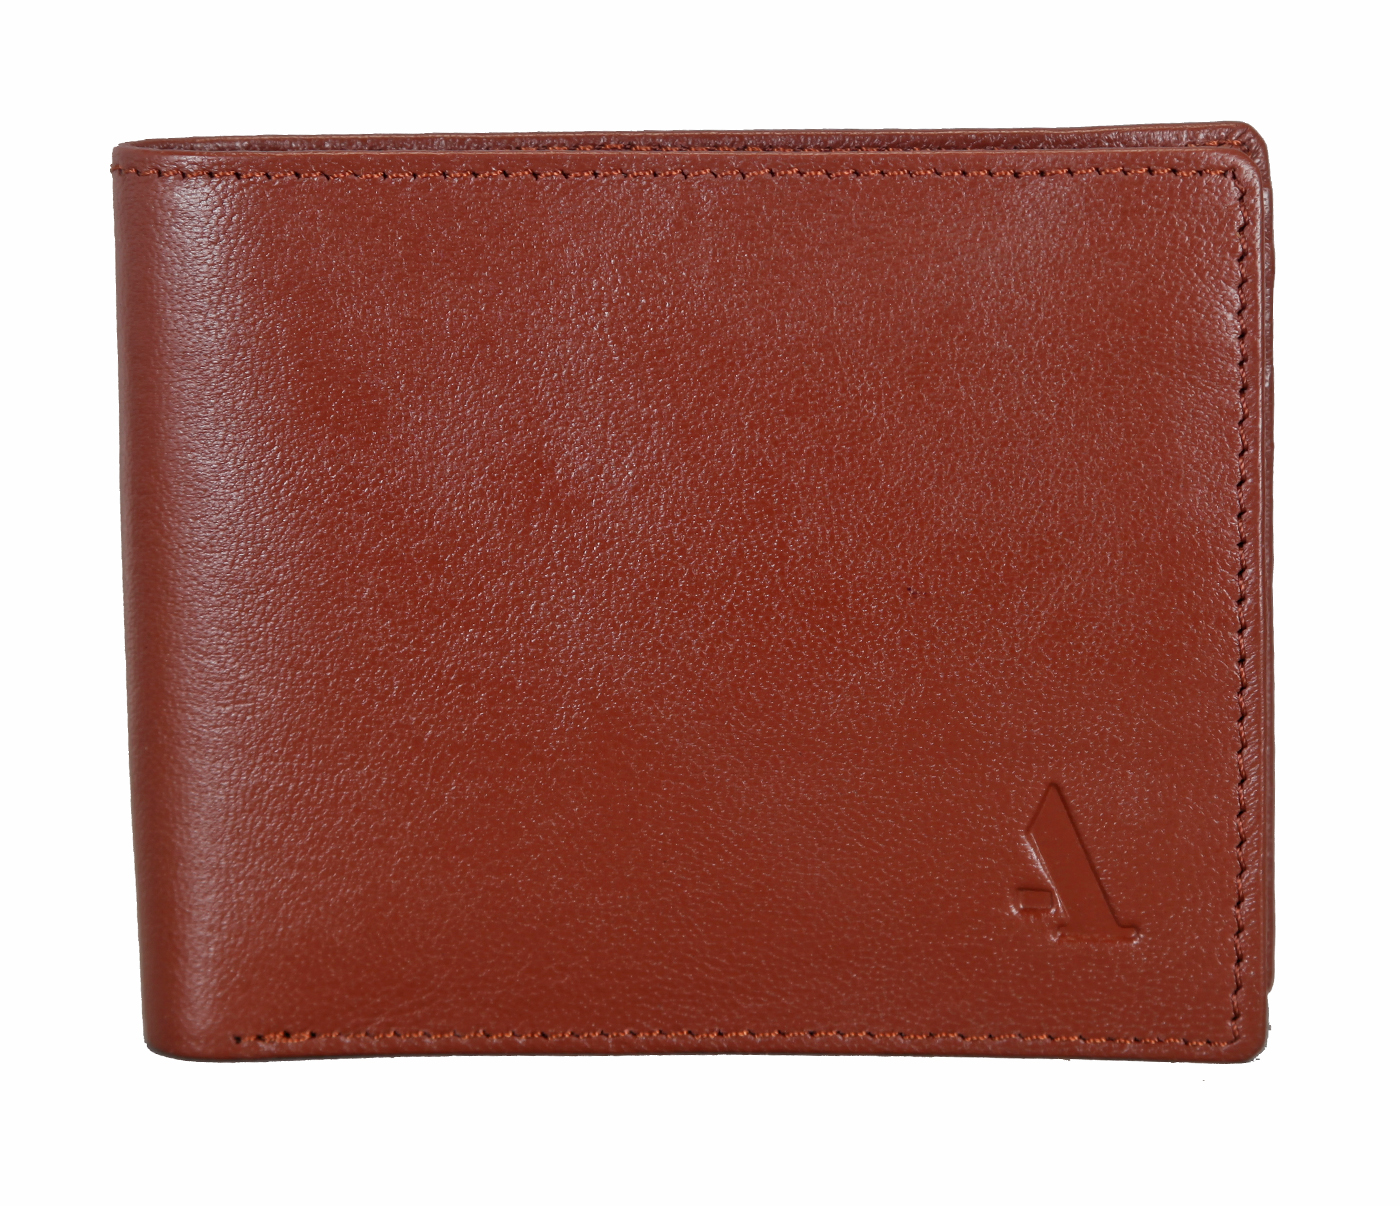 Wallet-Hudson-Men's bifold wallet with coin pocket in Genuine Leather - Tan